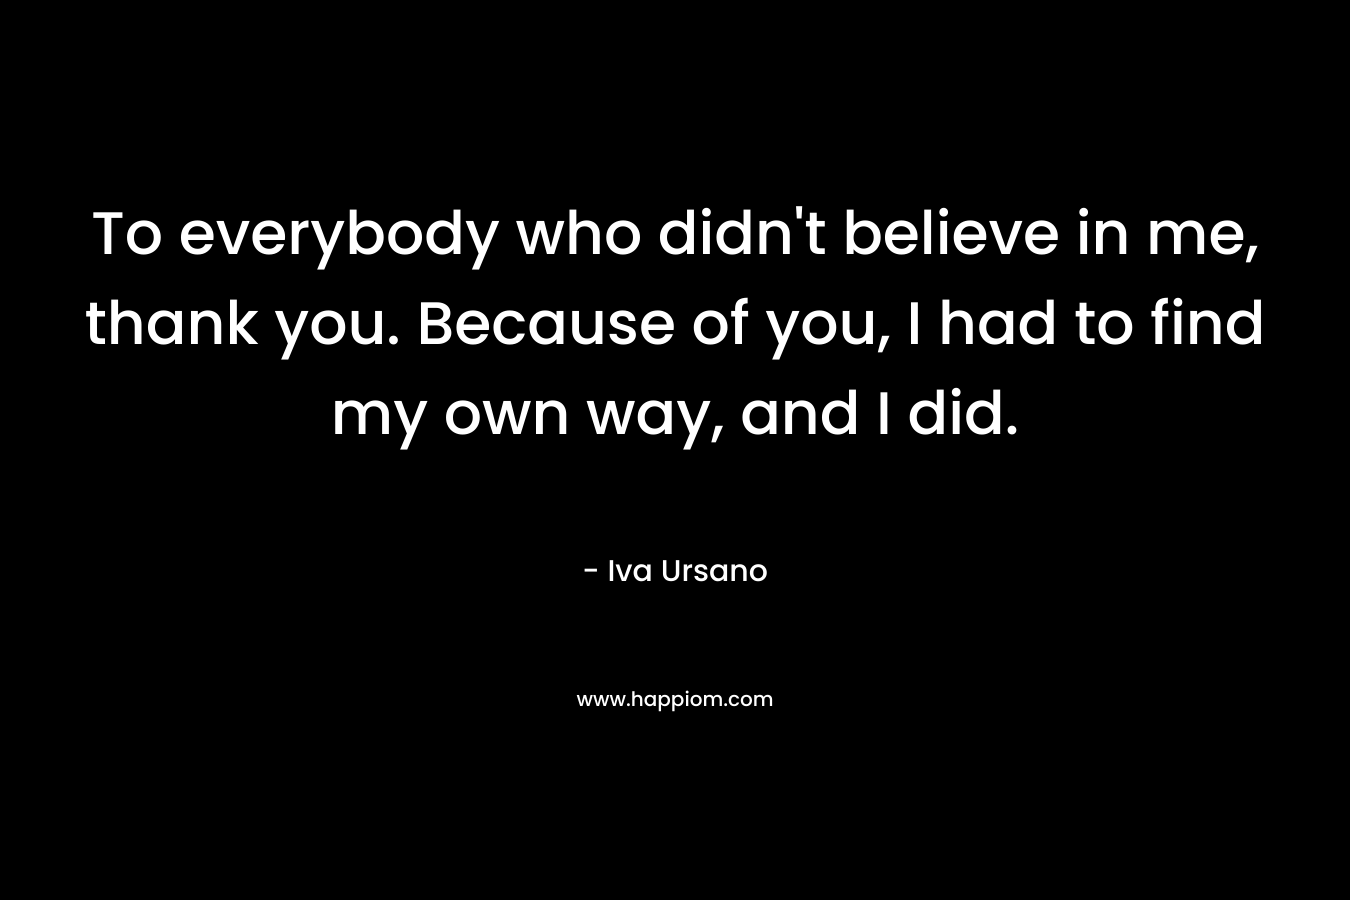 To everybody who didn’t believe in me, thank you. Because of you, I had to find my own way, and I did. – Iva Ursano